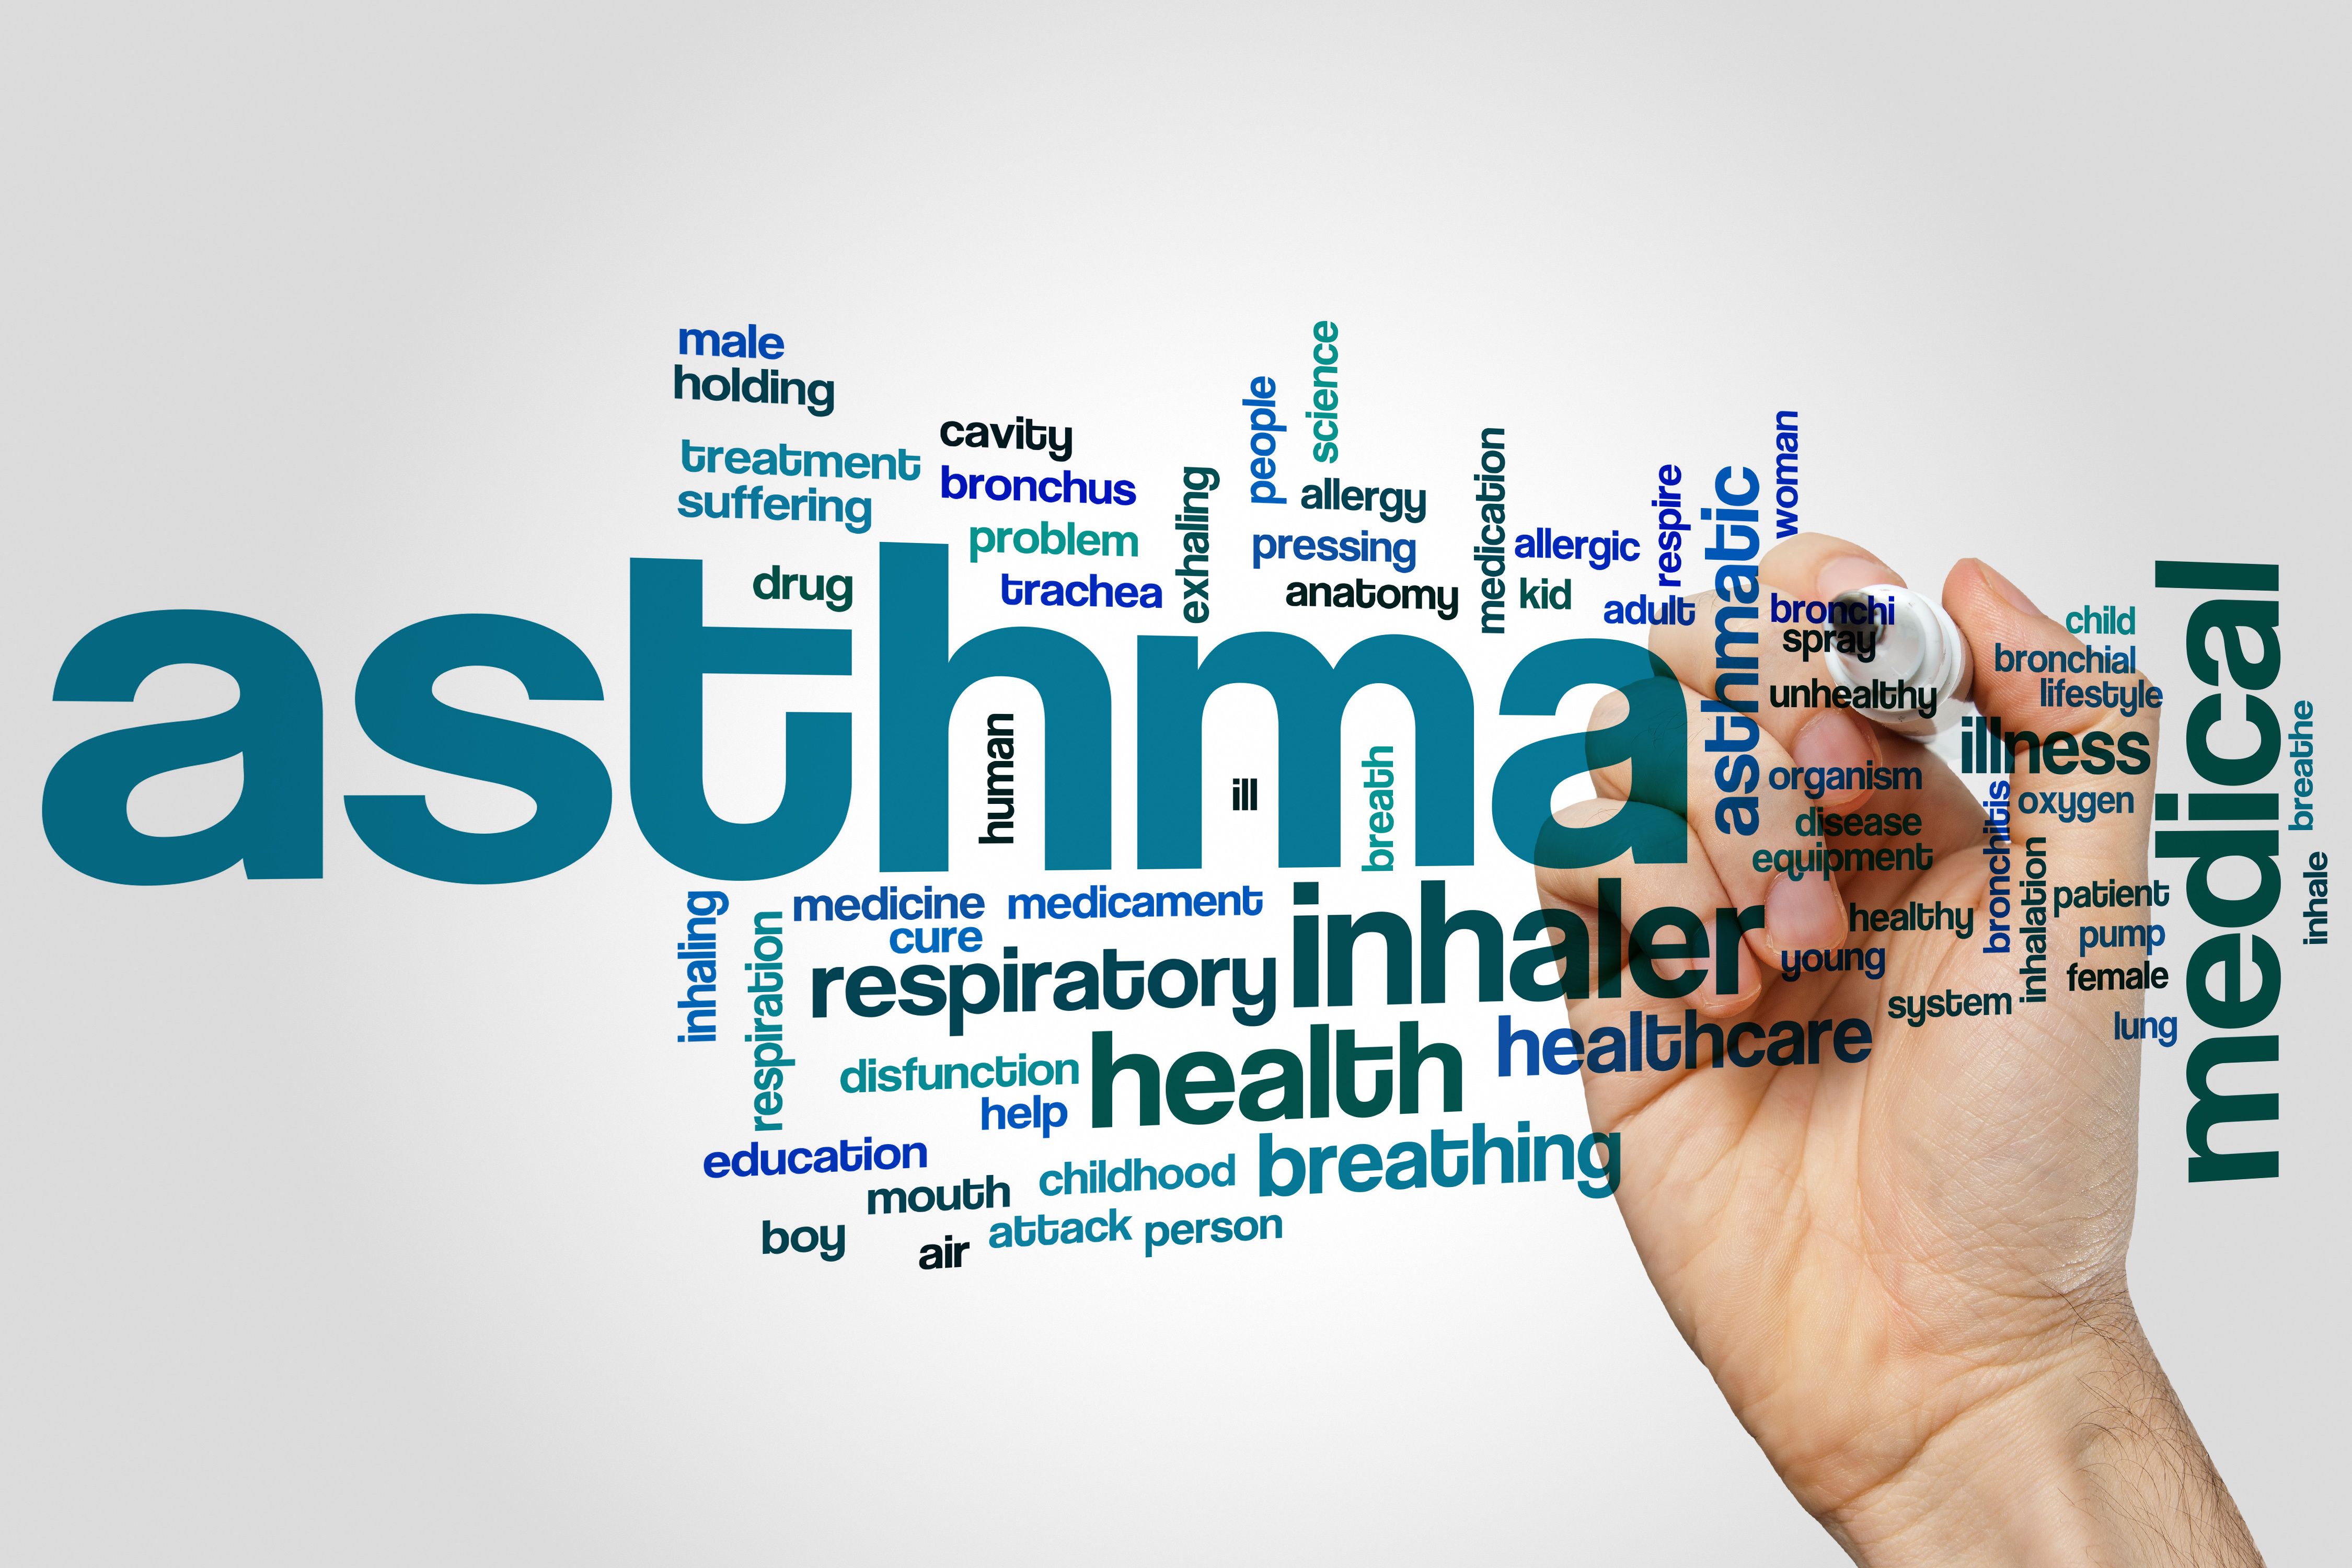 Worldwide Study Finds Asthma Control, Management Inadequate in Lower-Income Countries